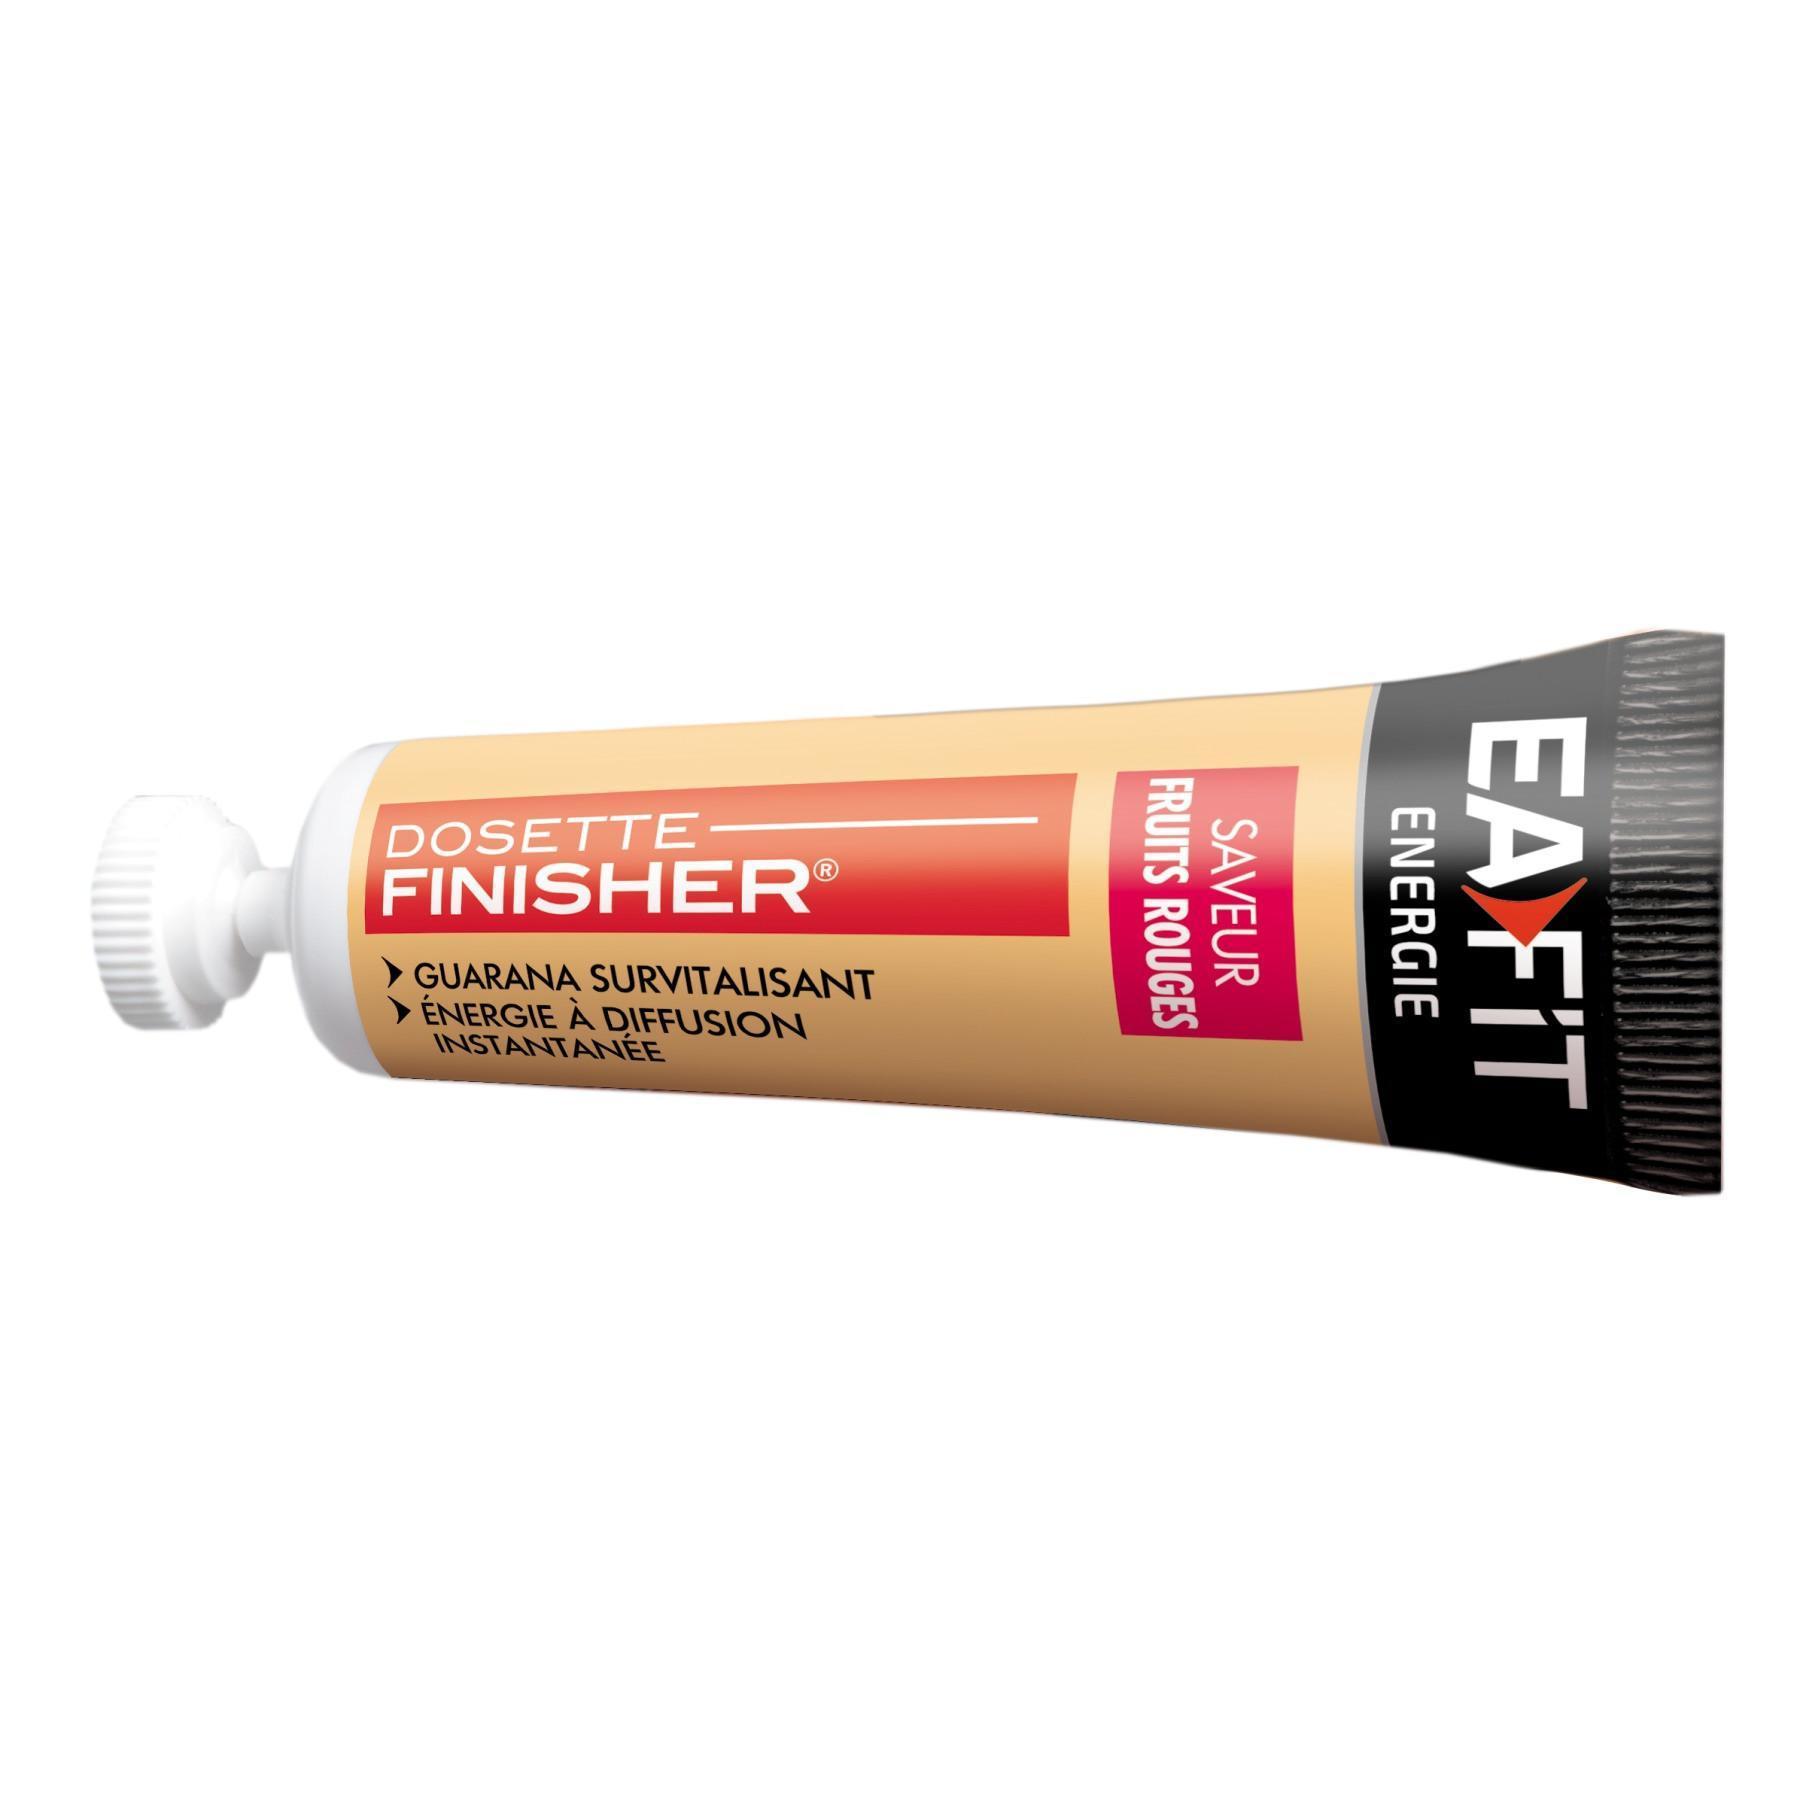 Finisher fruits rouges EA Fit (10x25g)